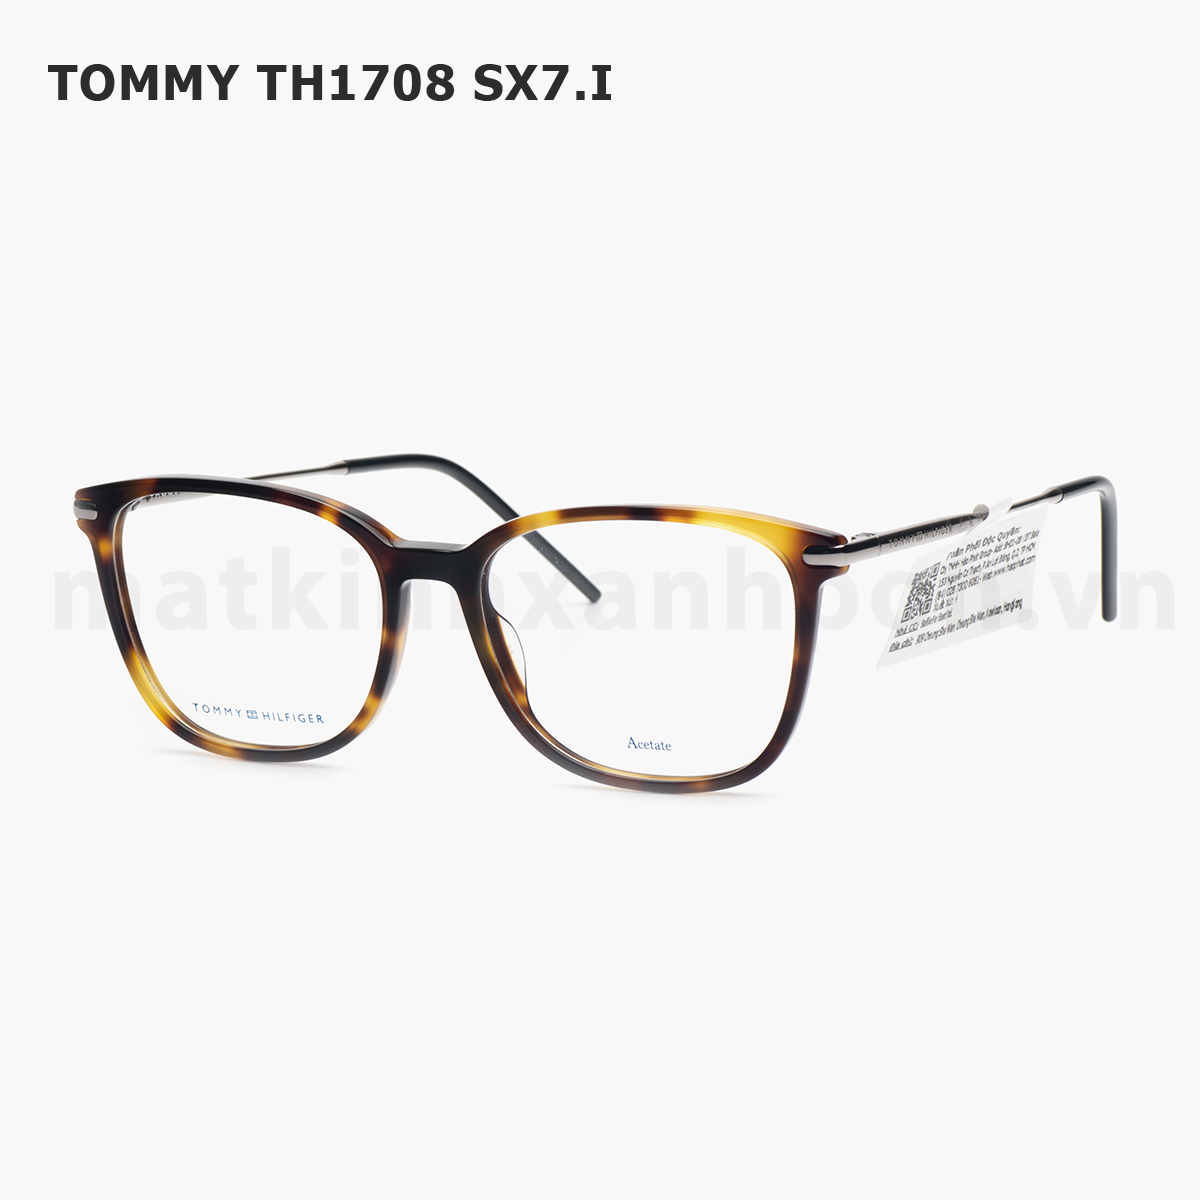 Tommy TH1708 SX7.I